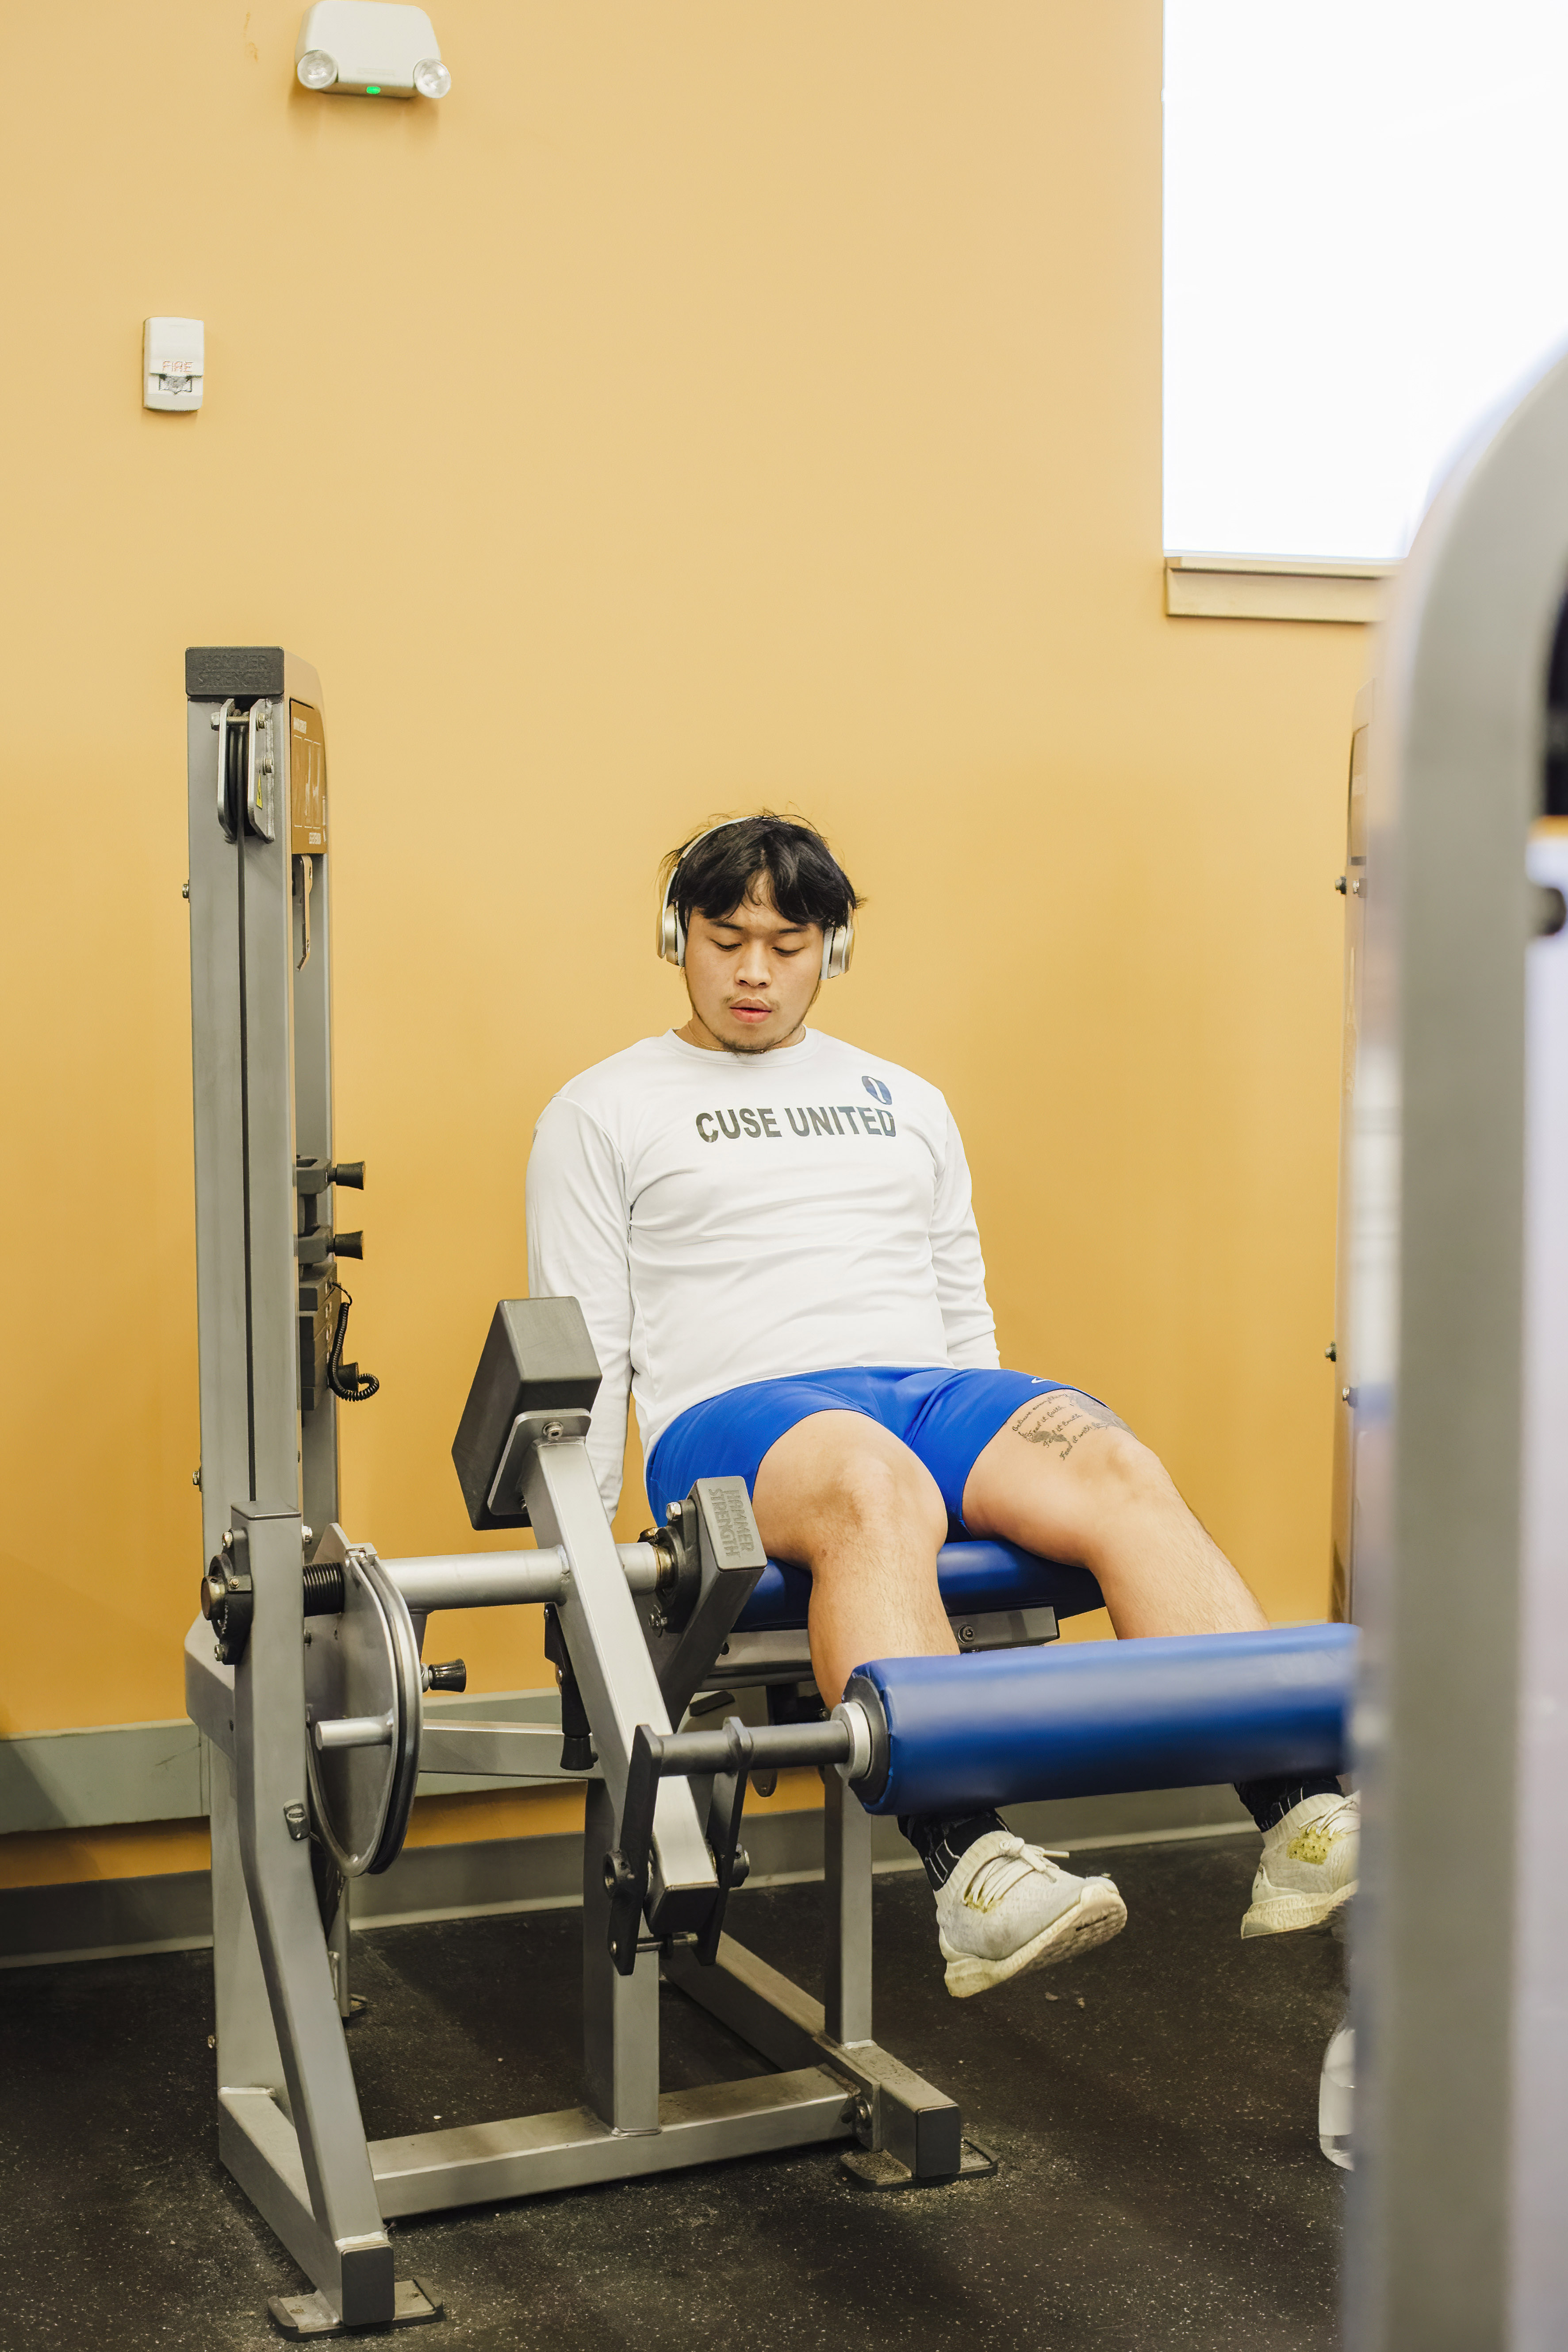 Student using workout facilities